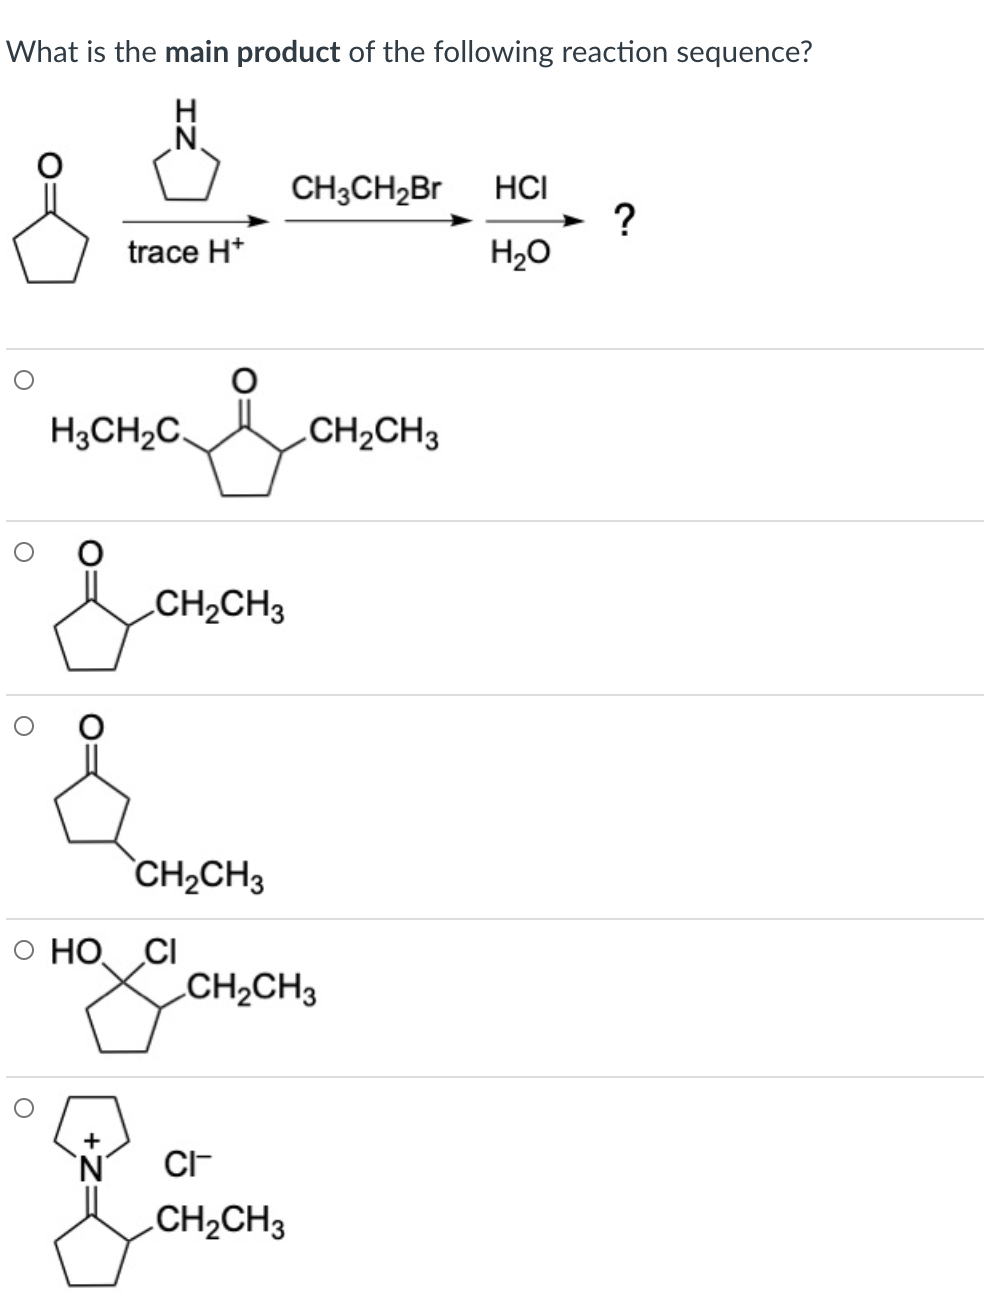 What is the main product of the following reaction sequence?
H
N.
CH3CH2Br
HCI
?
H20
trace H*
H3CH2C.
CH2CH3
CH2CH3
CH2CH3
O HO, CI
.CH2CH3
+
N'
CI-
CH2CH3
